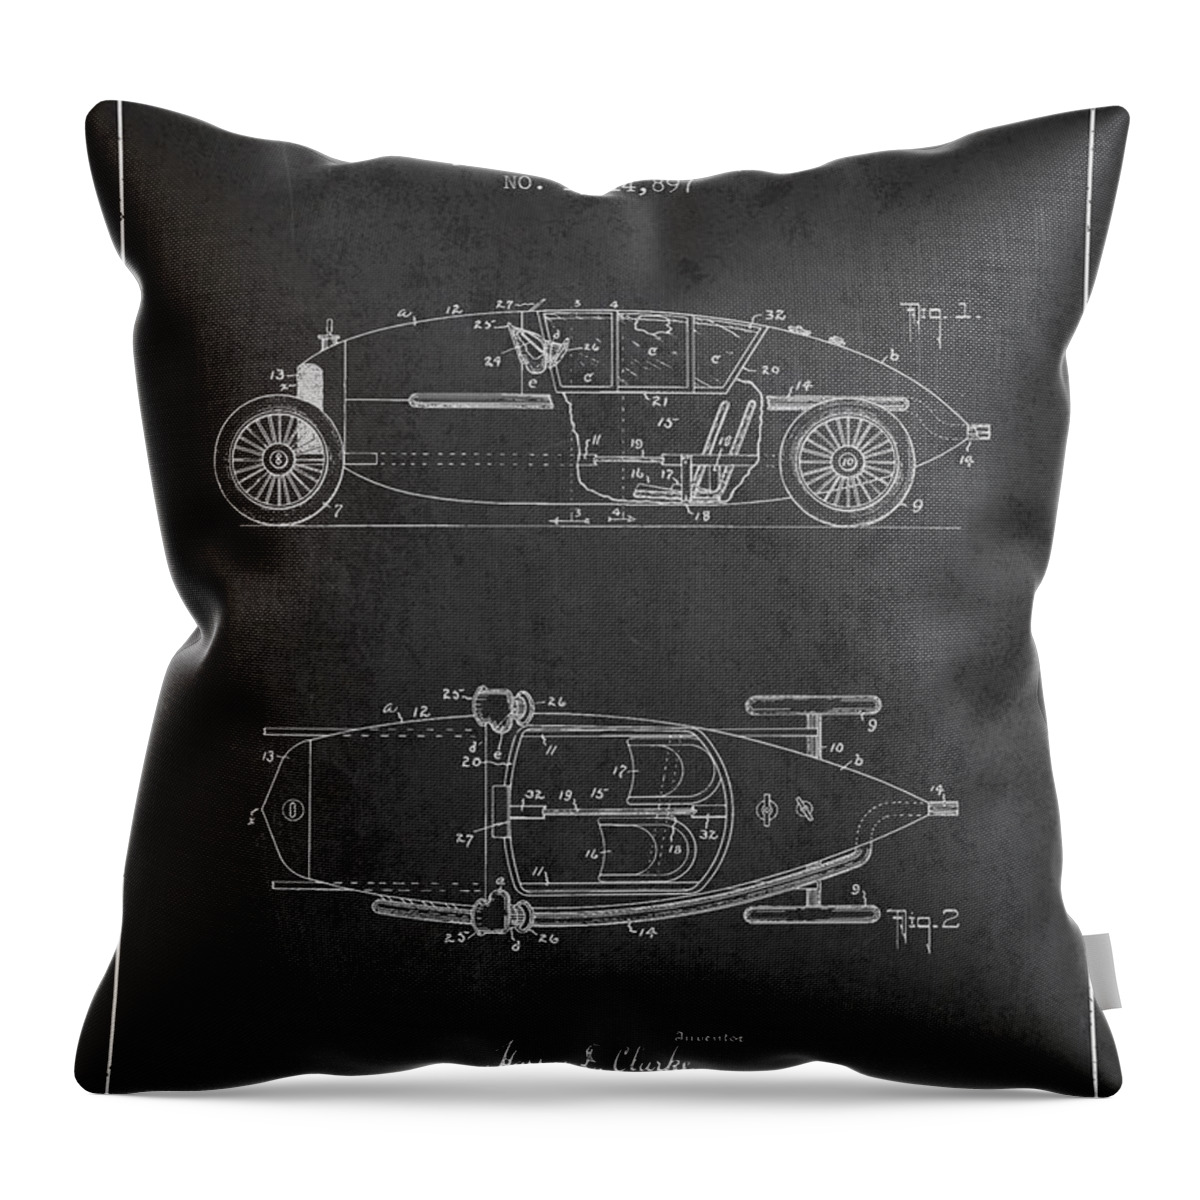 Racing Throw Pillow featuring the digital art 1917 Racing Vehicle Patent - Charcoal by Aged Pixel